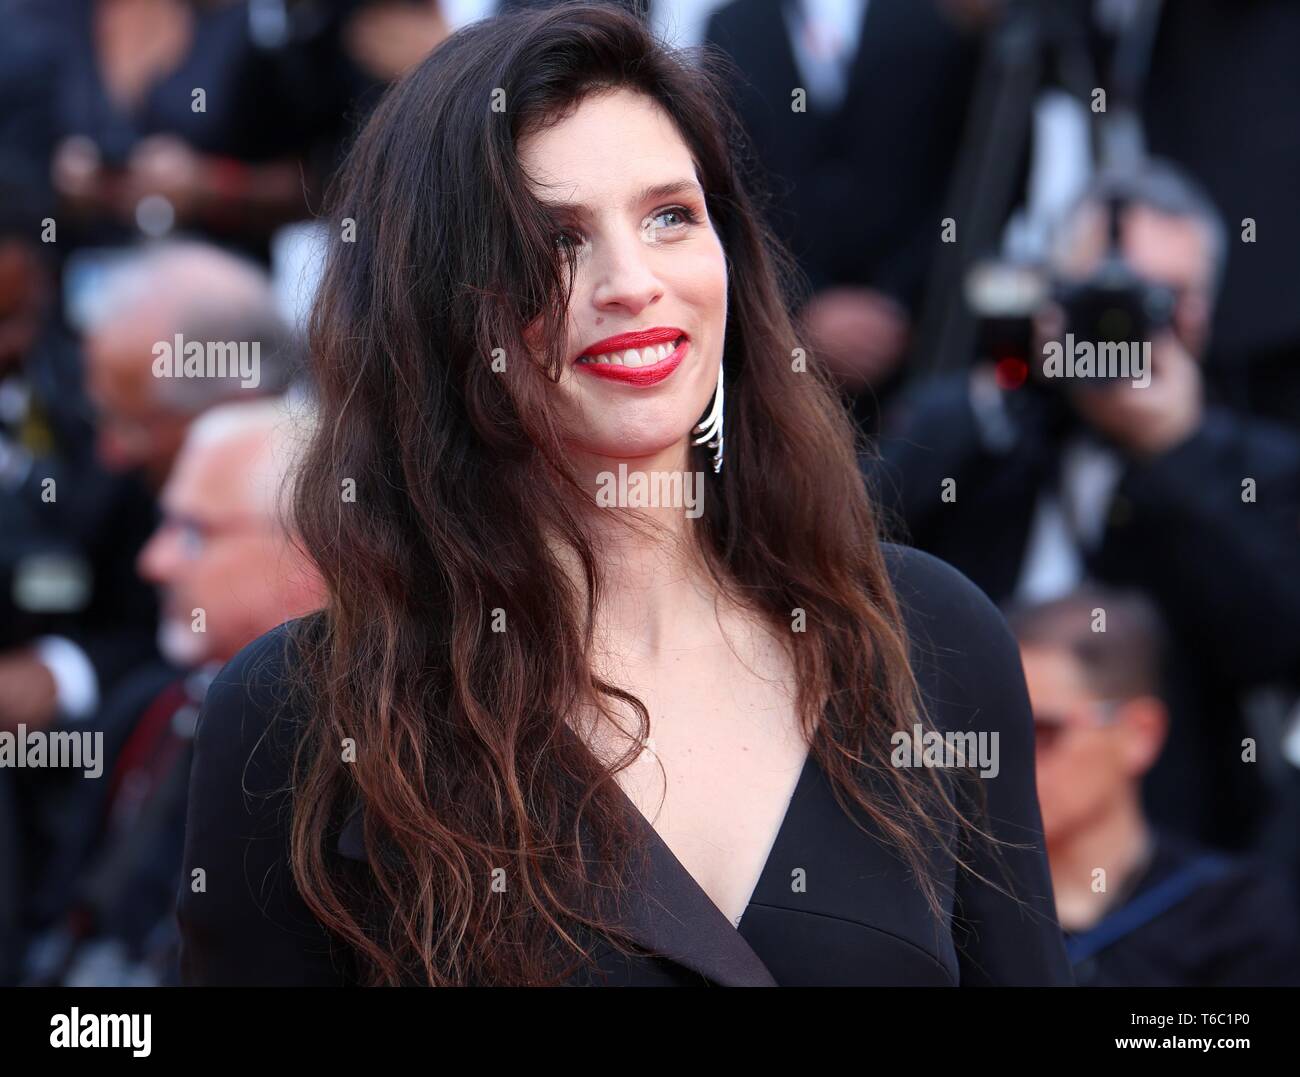 CANNES, FRANCE – MAY 23, 2017: Maiwenn Le Besco on the Cannes Film Festival 70th anniversary celebration red carpet (Photo: Mickael Chavet) Stock Photo